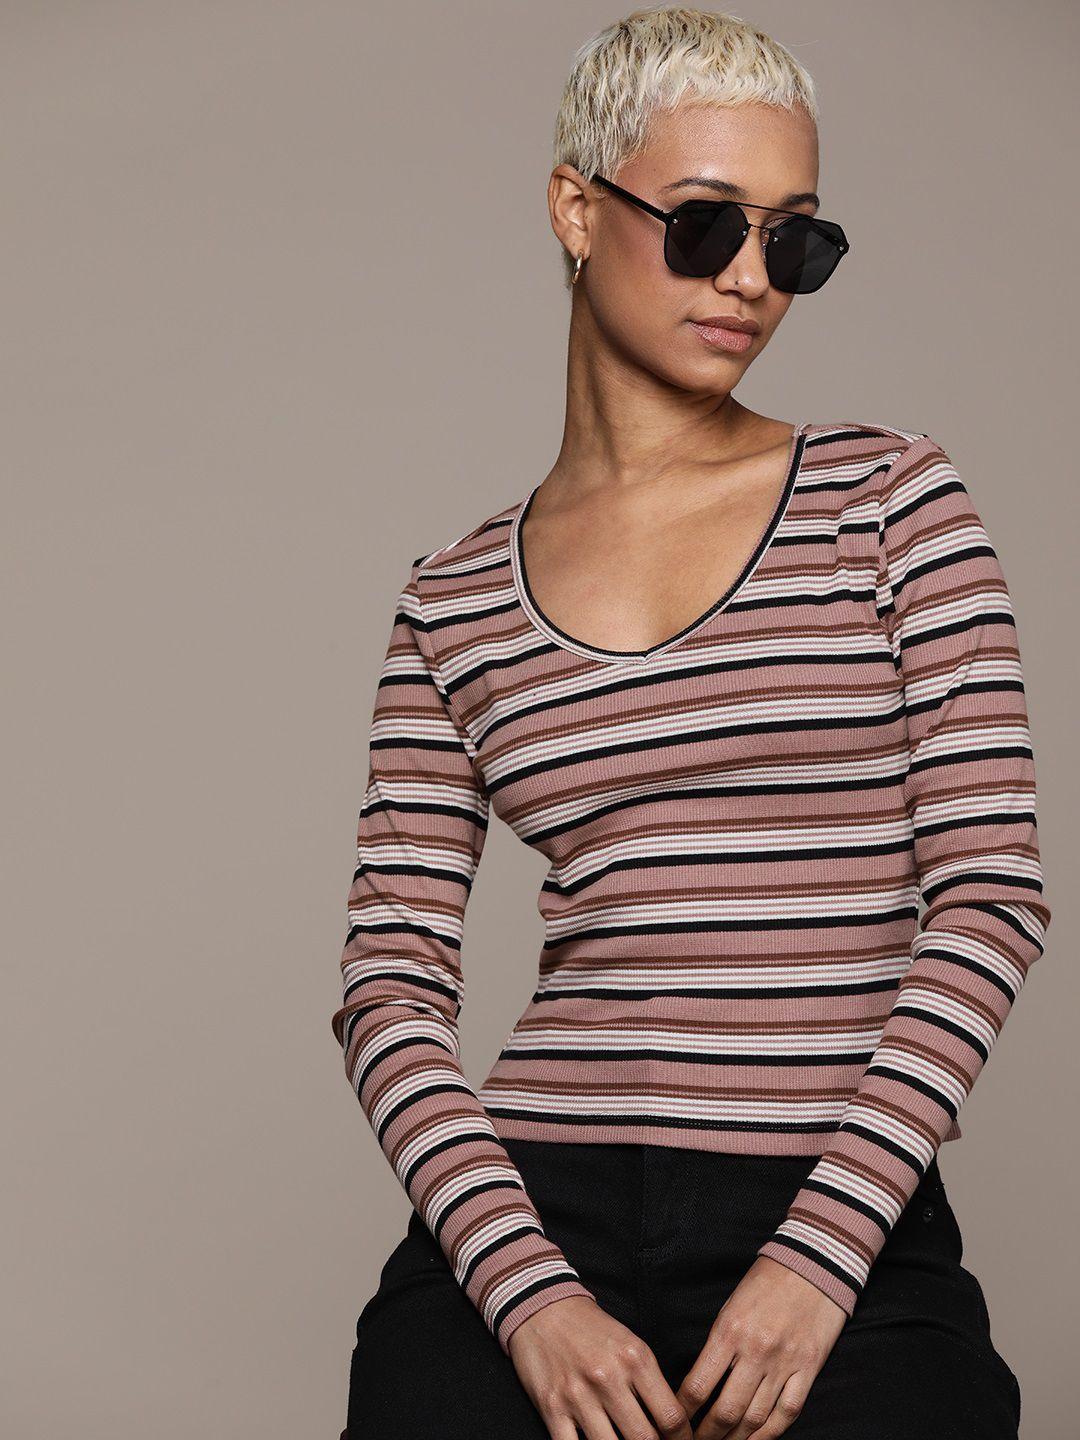 the-roadster-lifestyle-co.-horizontal-striped-v-neck-fitted-top